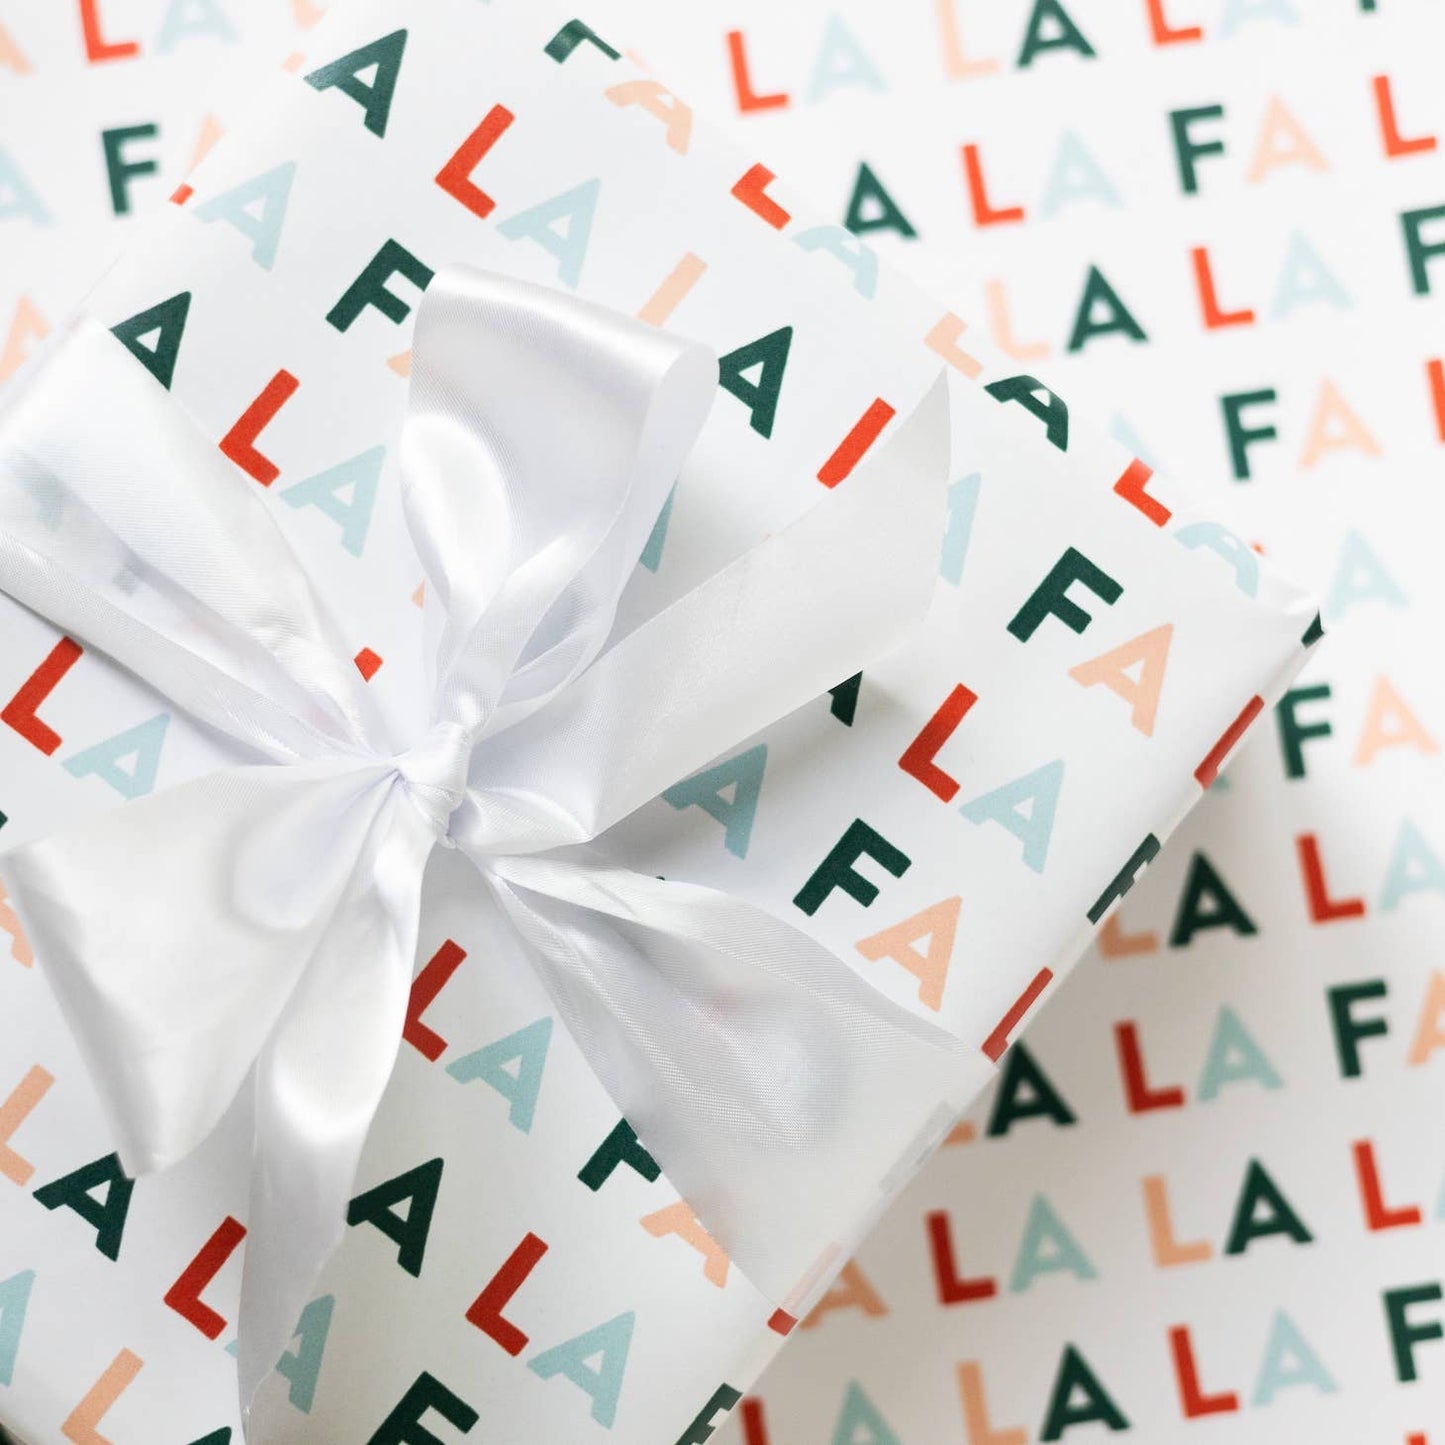 FA LA LA Lettered Wrapping Paper Roll - Storm and Sky Shoppe - Joy Paper Co.